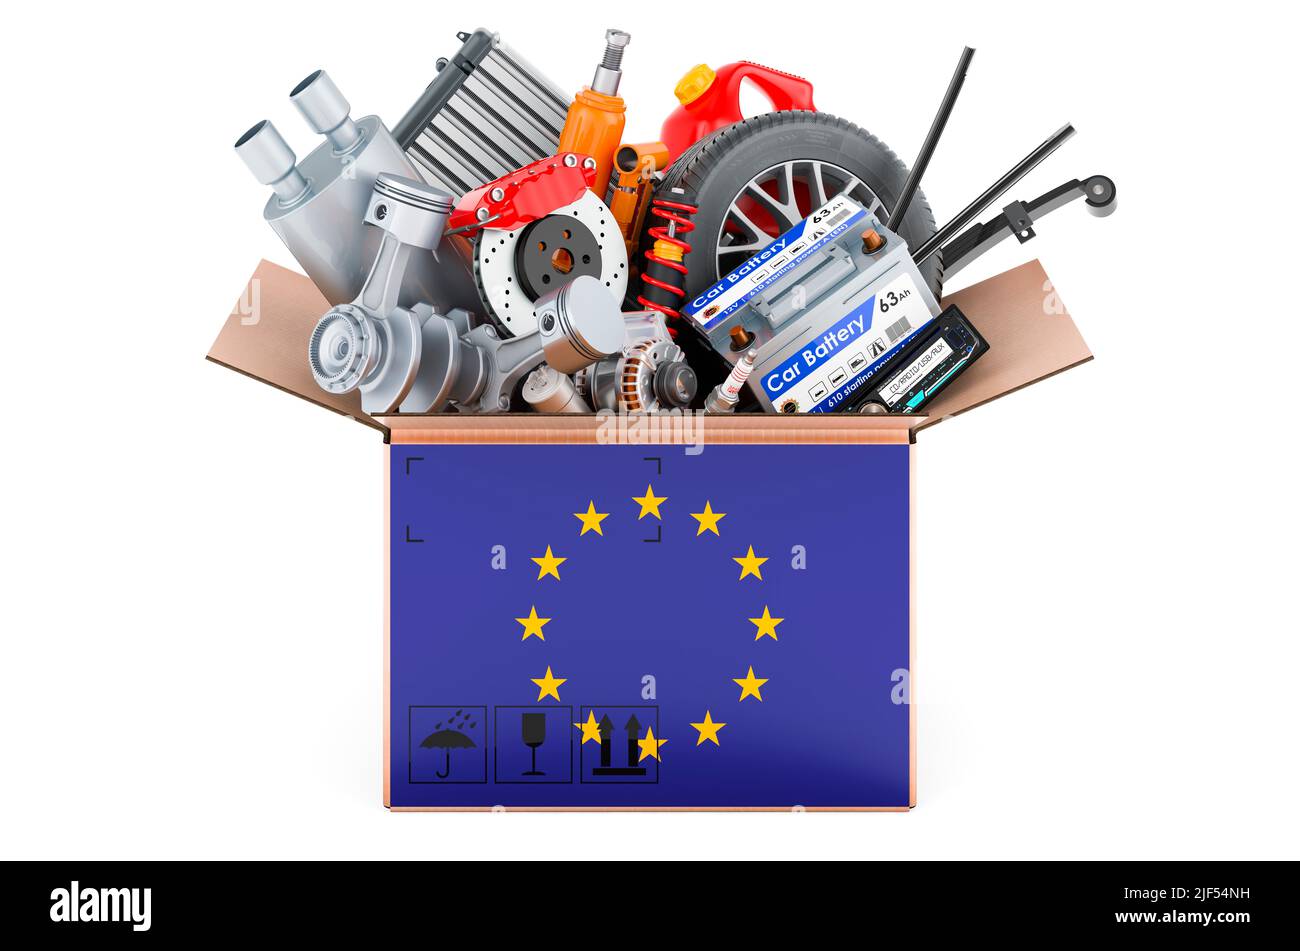 The EU flag painted on the parcel with car parts. 3D rendering isolated on white background Stock Photo